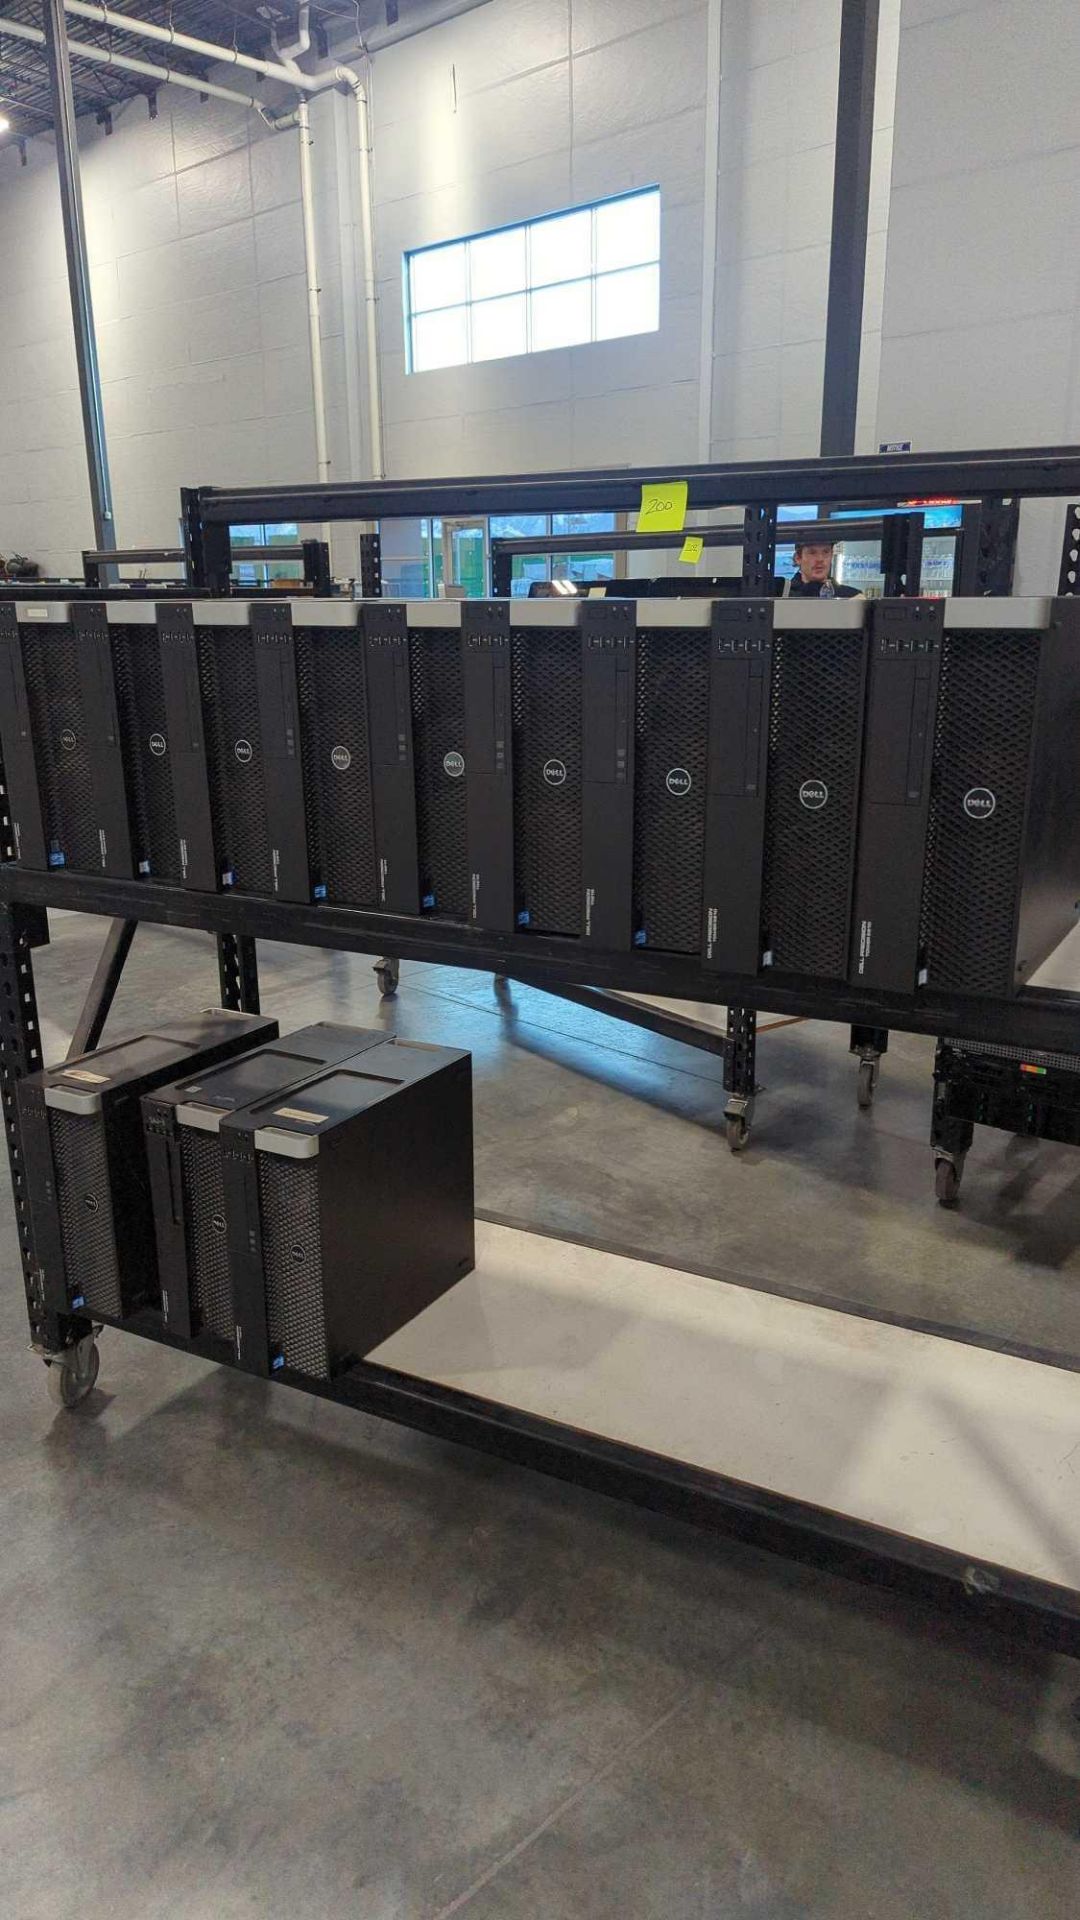 Rolling Rack of Dell Desktop Towers - Image 16 of 16